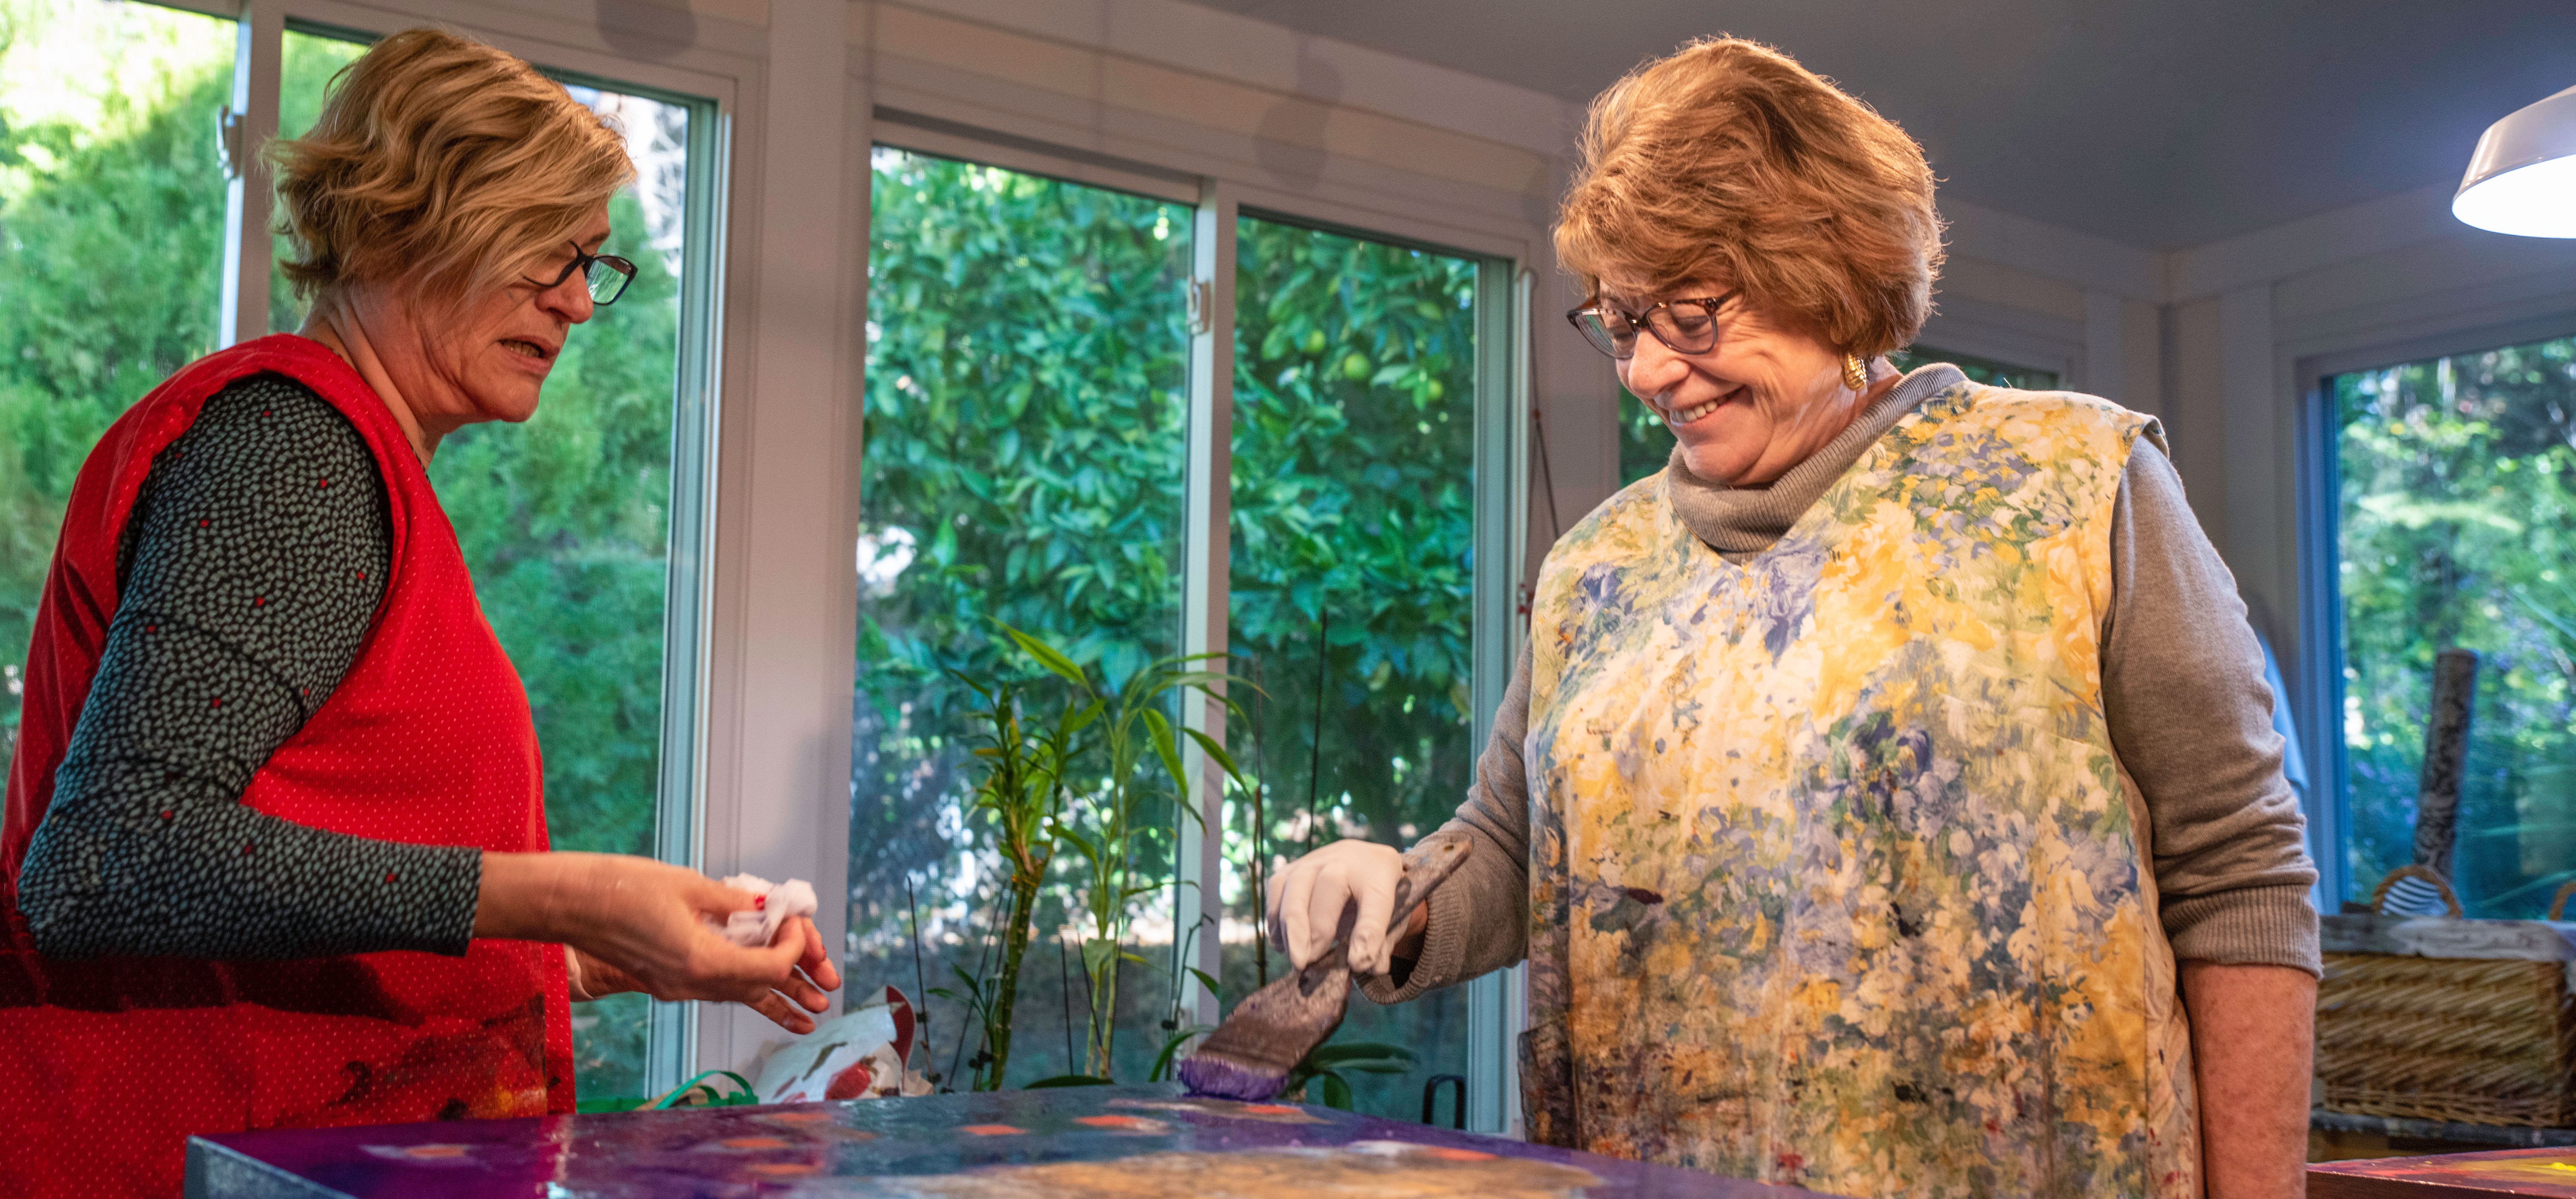 Terenia Offenbacker has regained her love of painting after minimally invasive robotic surgery to correct a complex spinal degeneration.